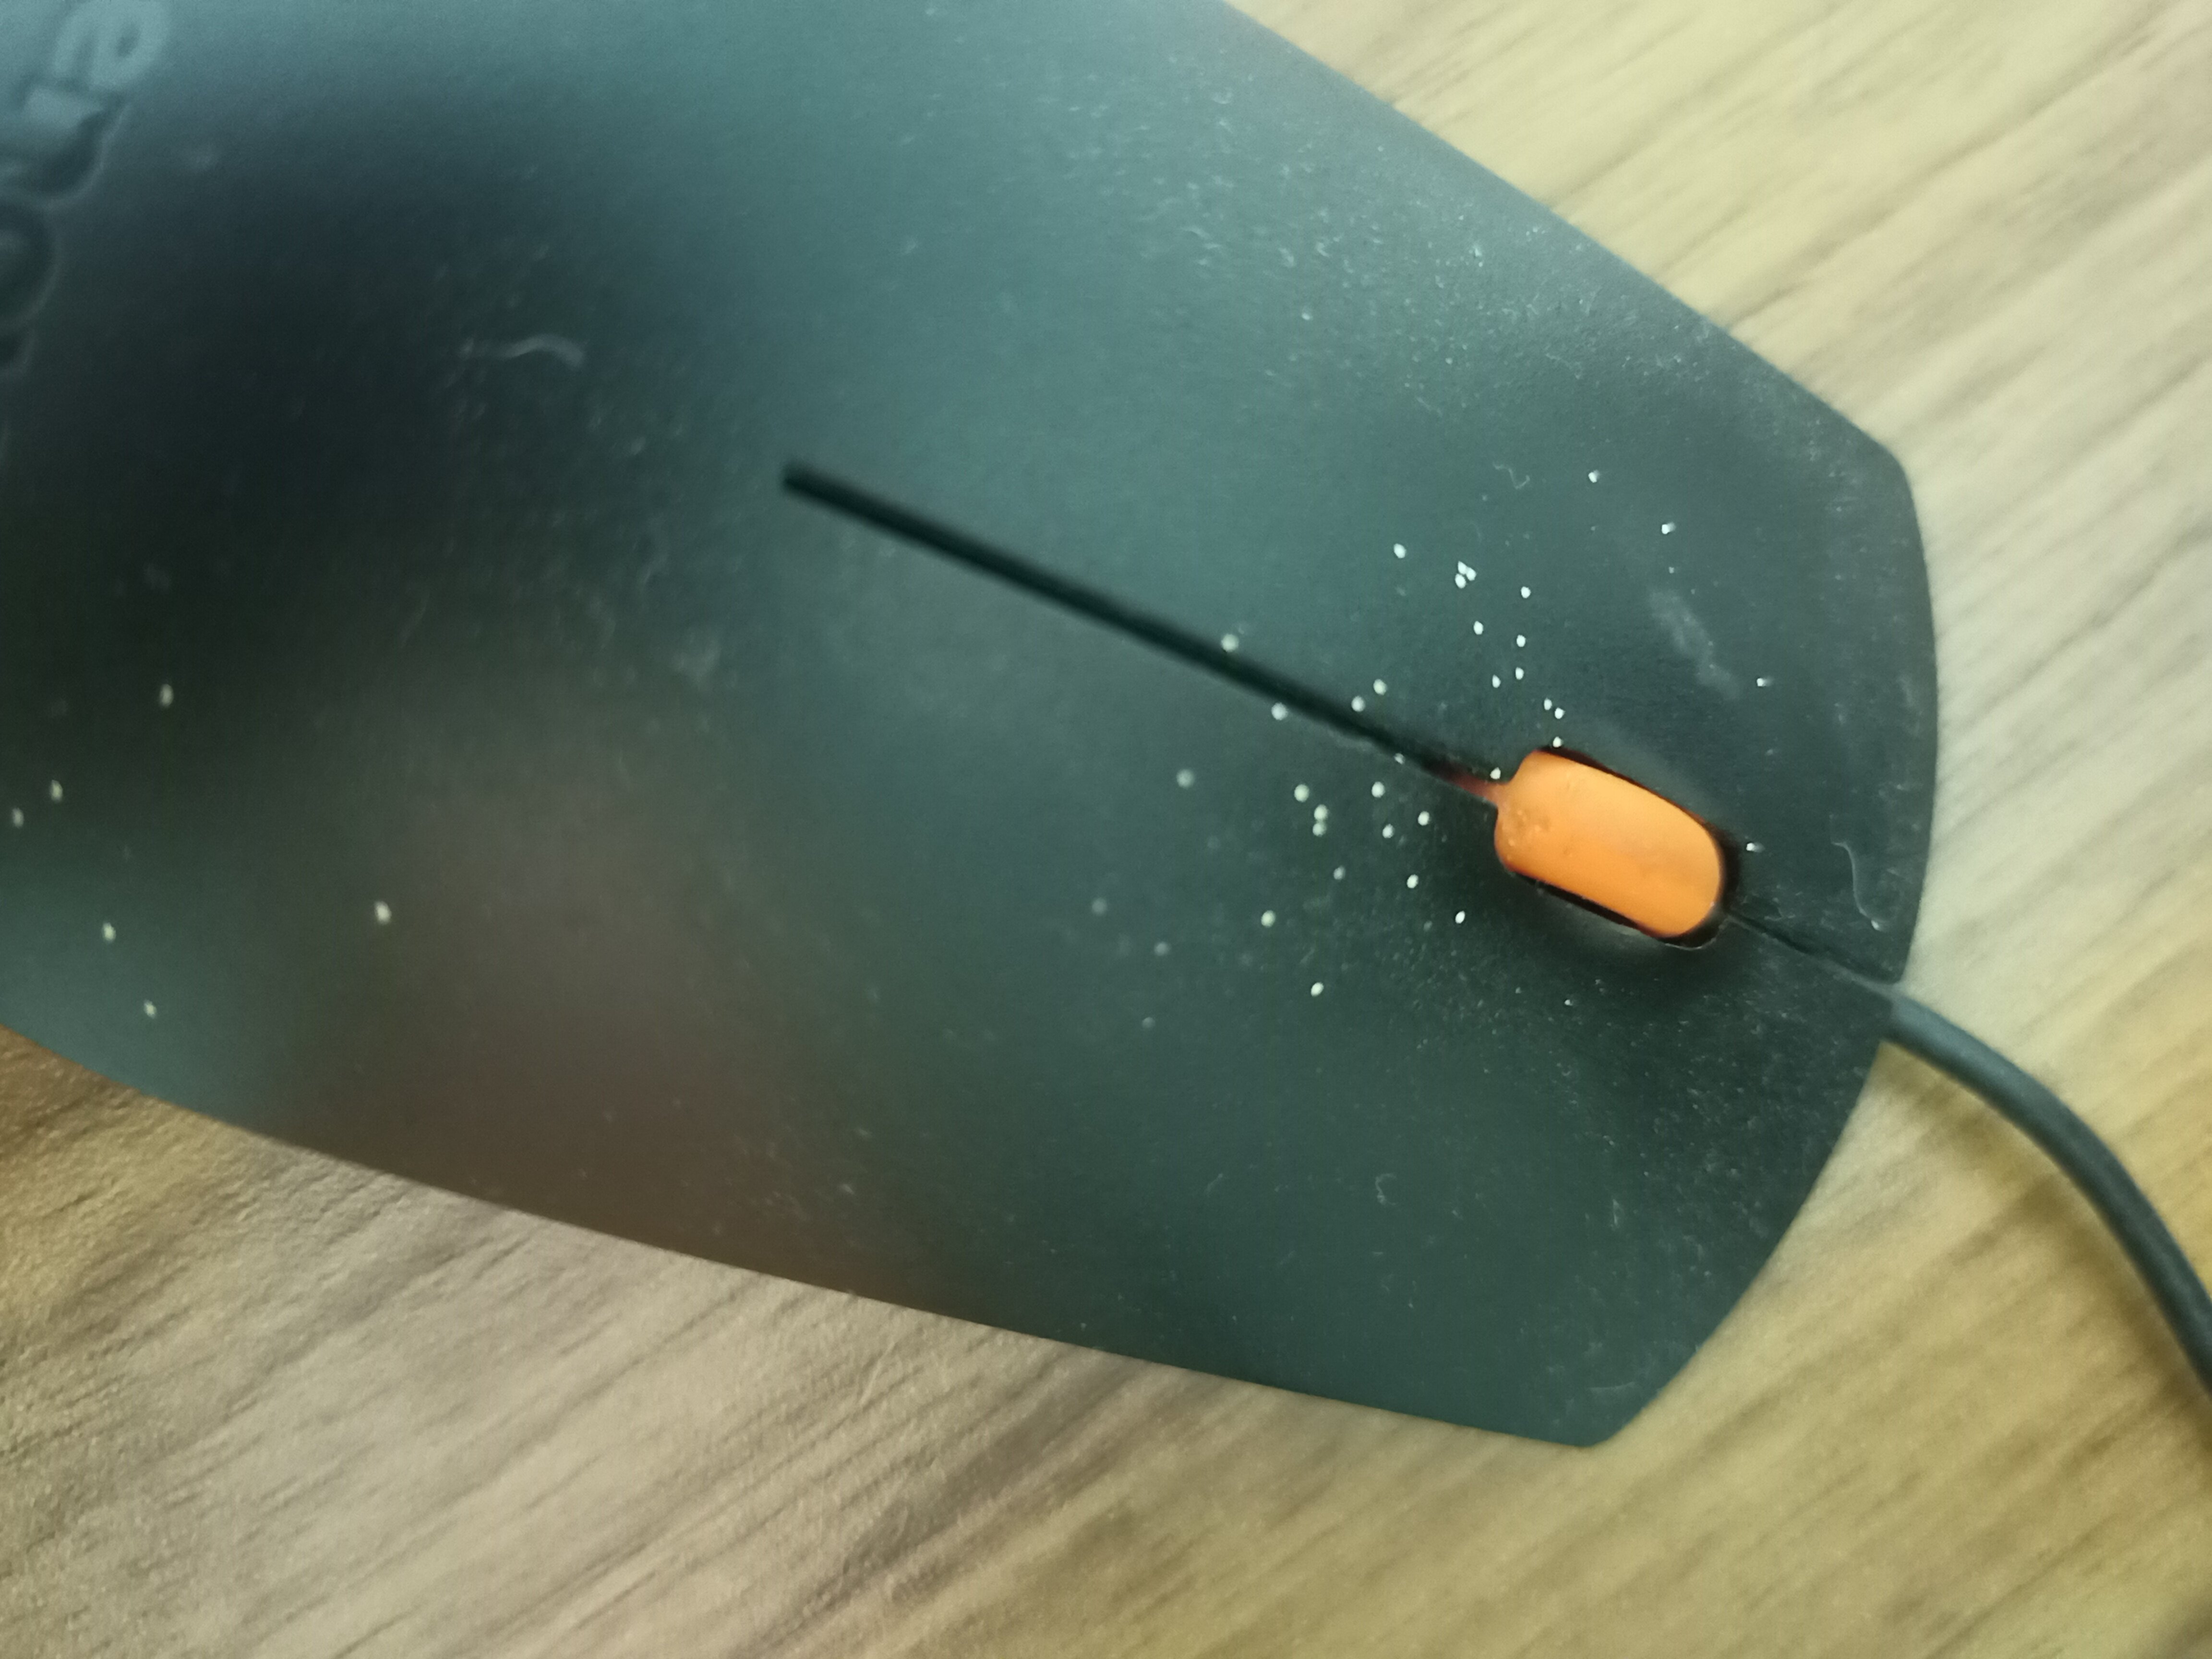 My mouse with tiny sand-like dots